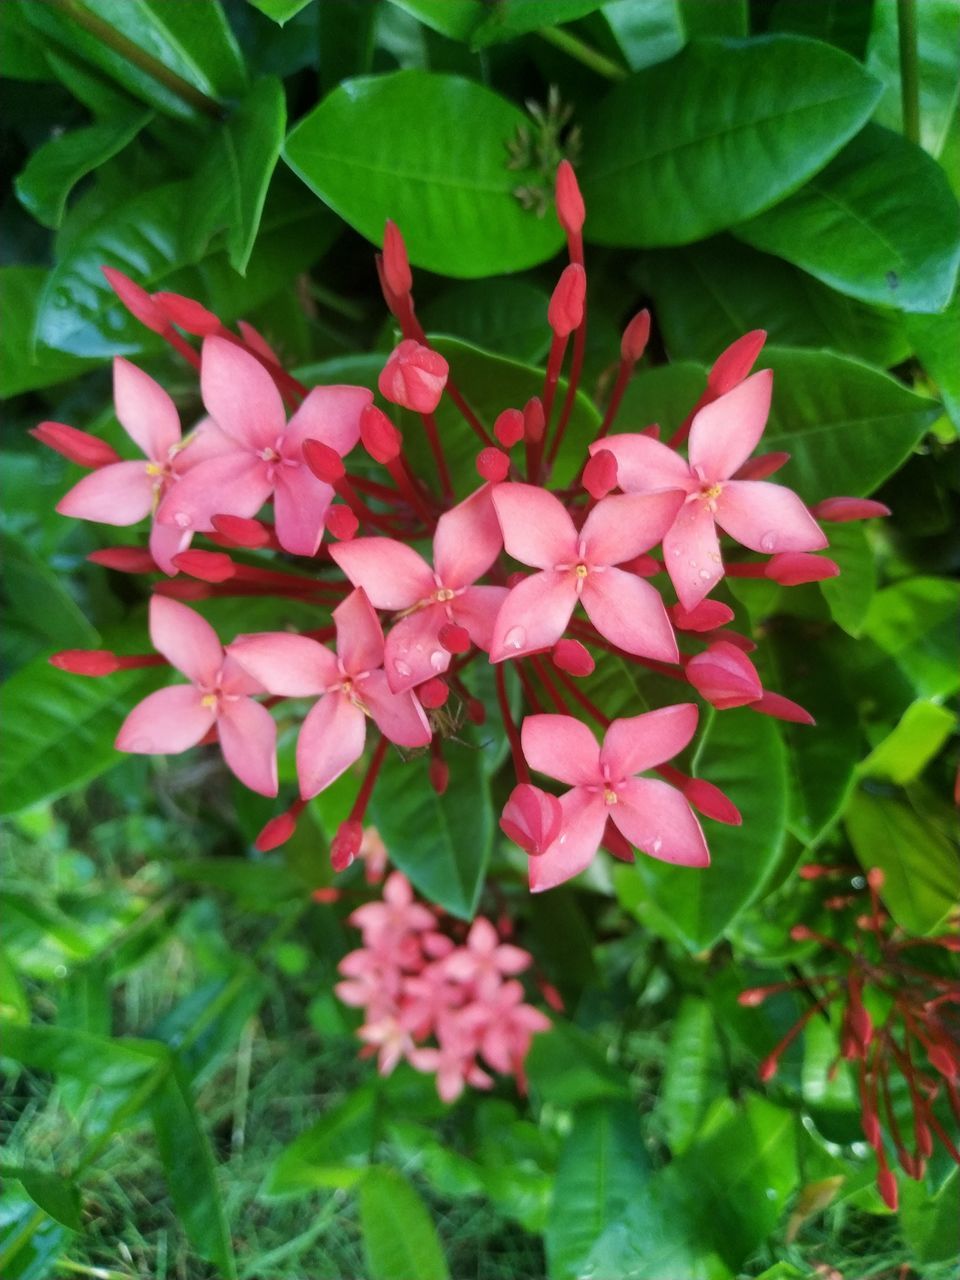 plant, flower, flowering plant, plant part, leaf, beauty in nature, pink, freshness, nature, green, growth, close-up, petal, fragility, no people, outdoors, flower head, inflorescence, day, botany, shrub, red, springtime